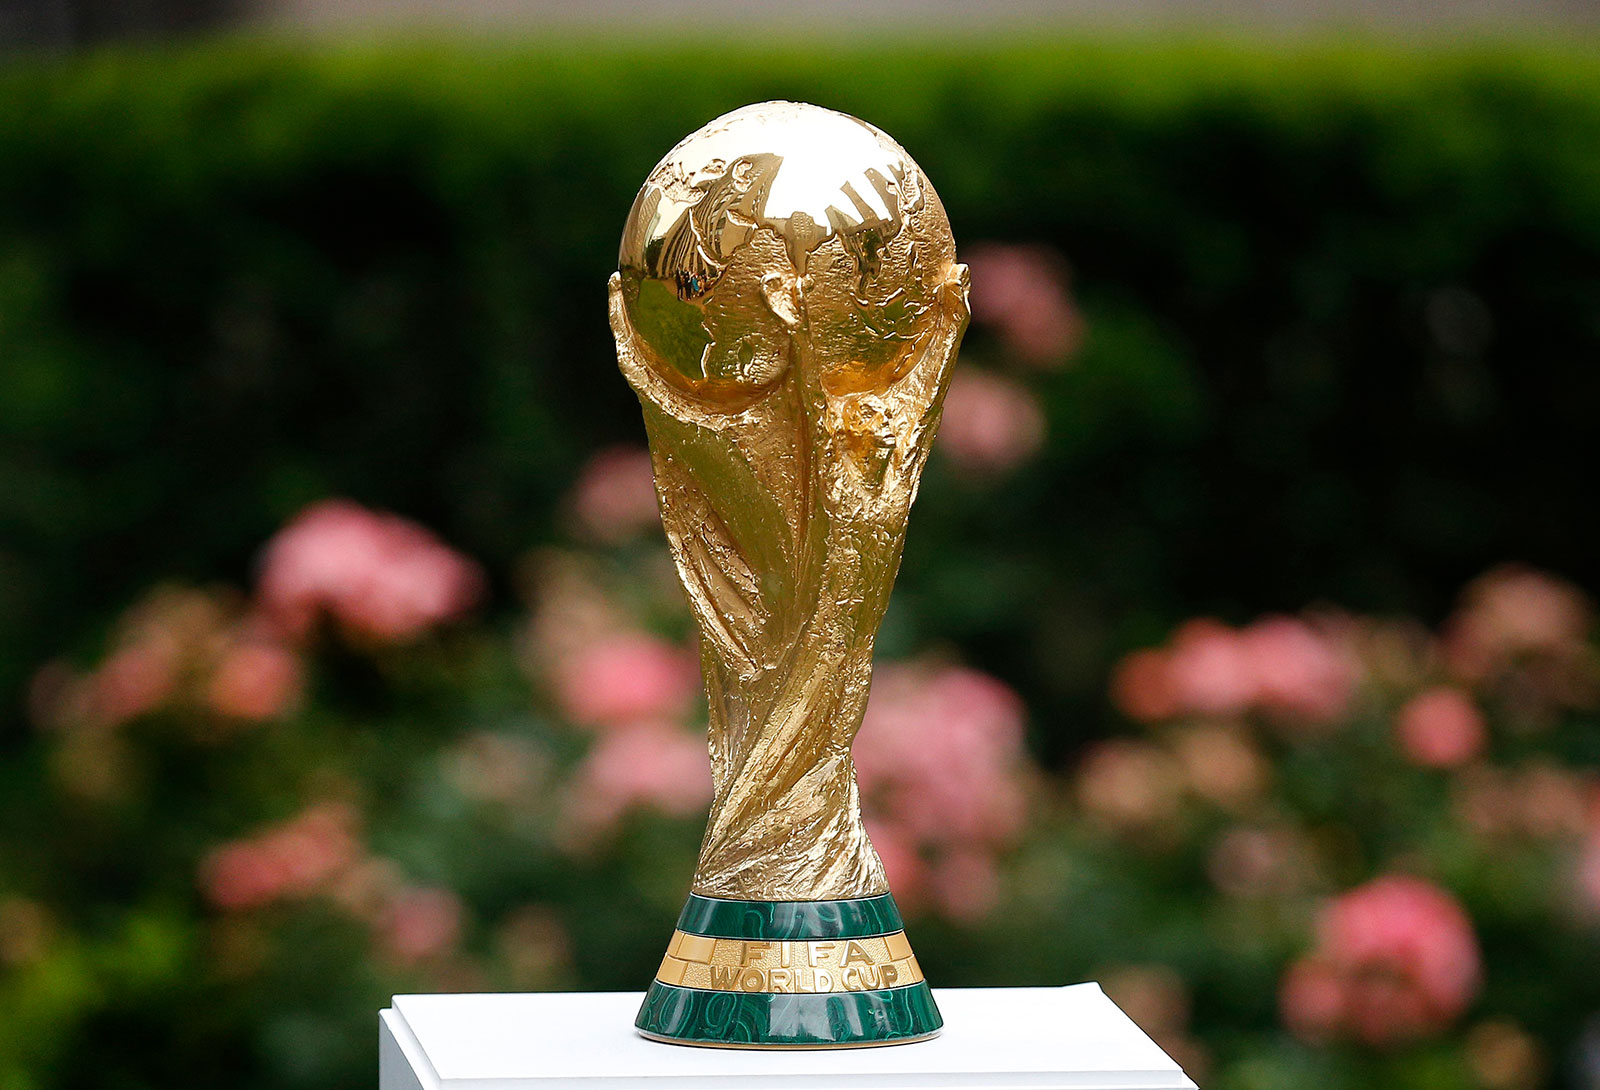 Everything you need to know about the FIFA World Cup 2026™ LIVE